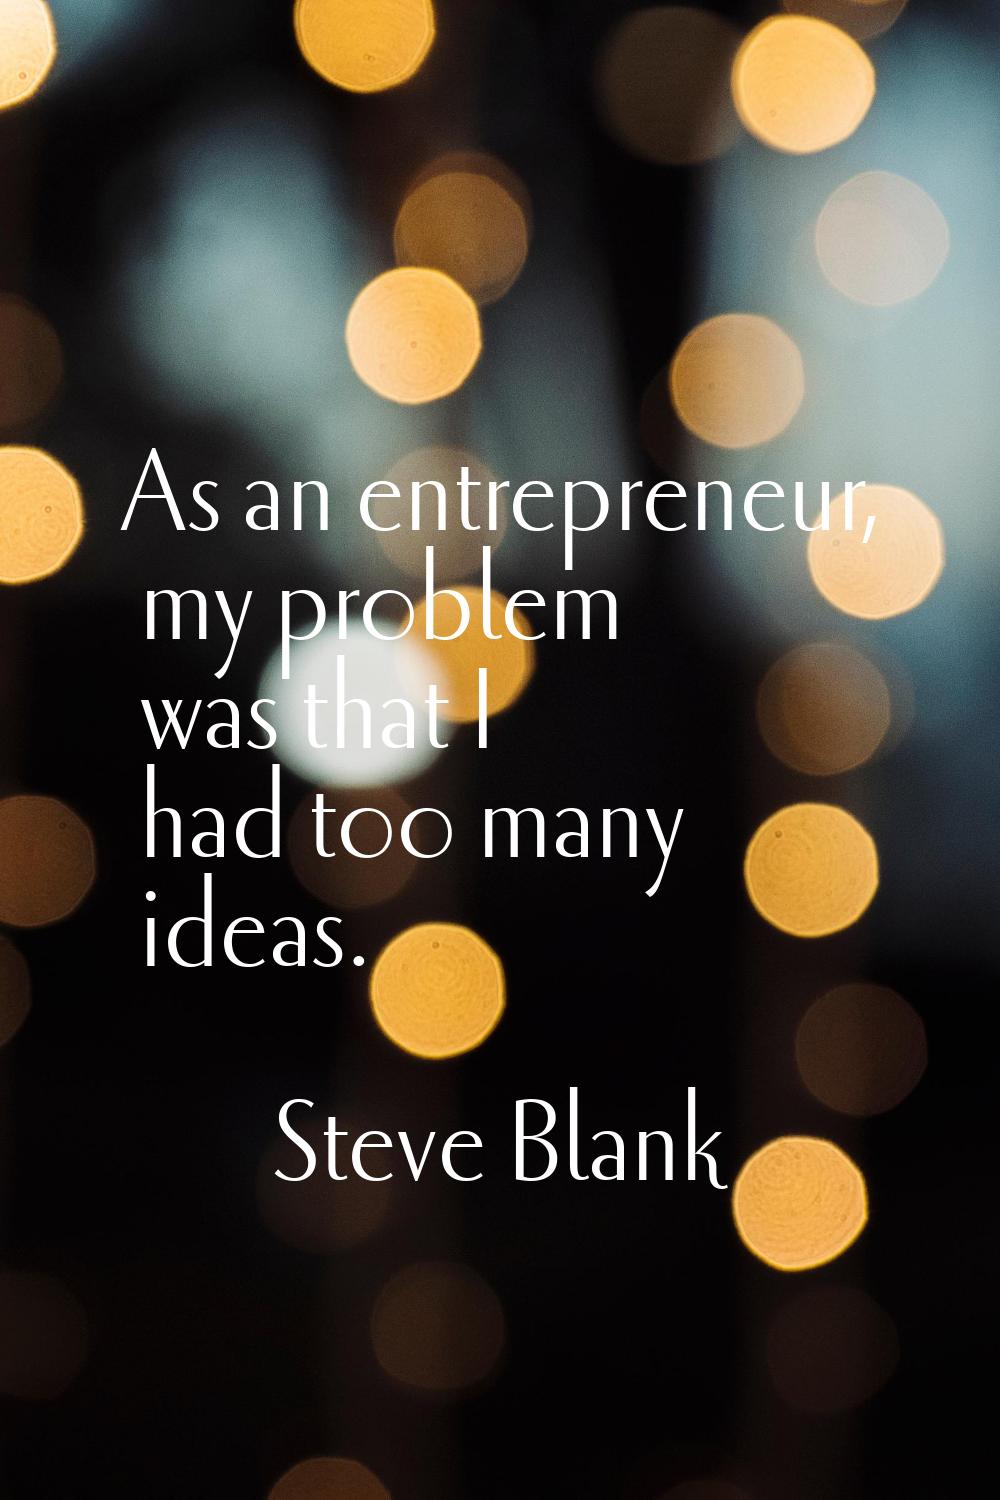 As an entrepreneur, my problem was that I had too many ideas.